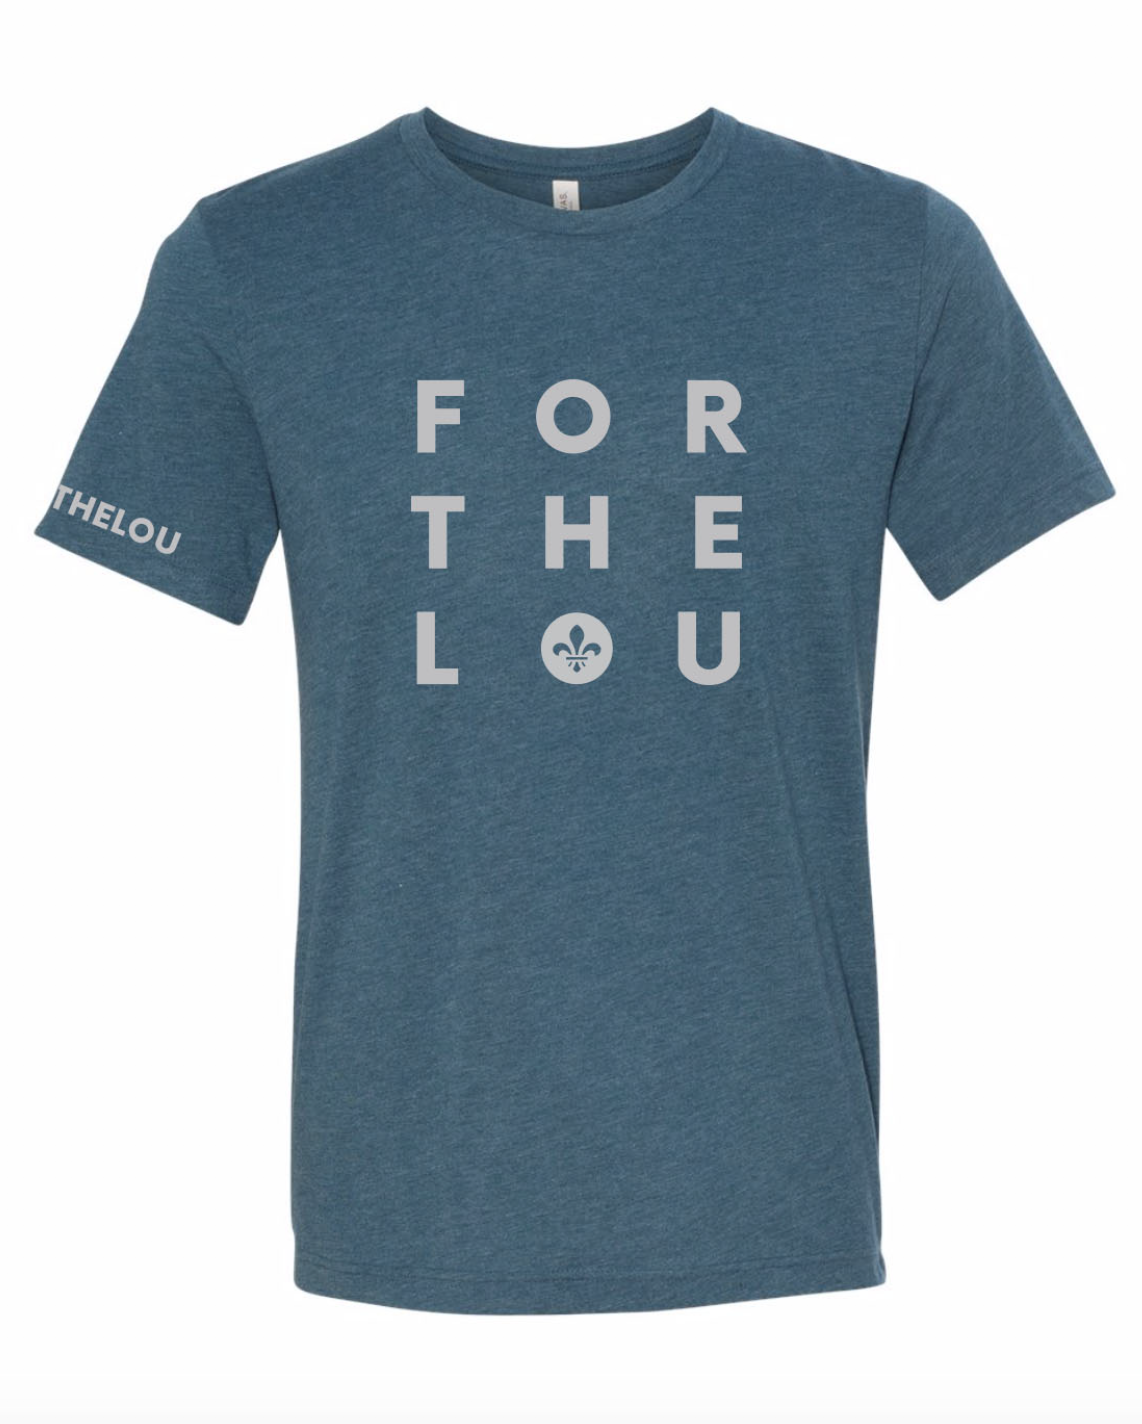 Forthelou T-shirt - Adult - Blue